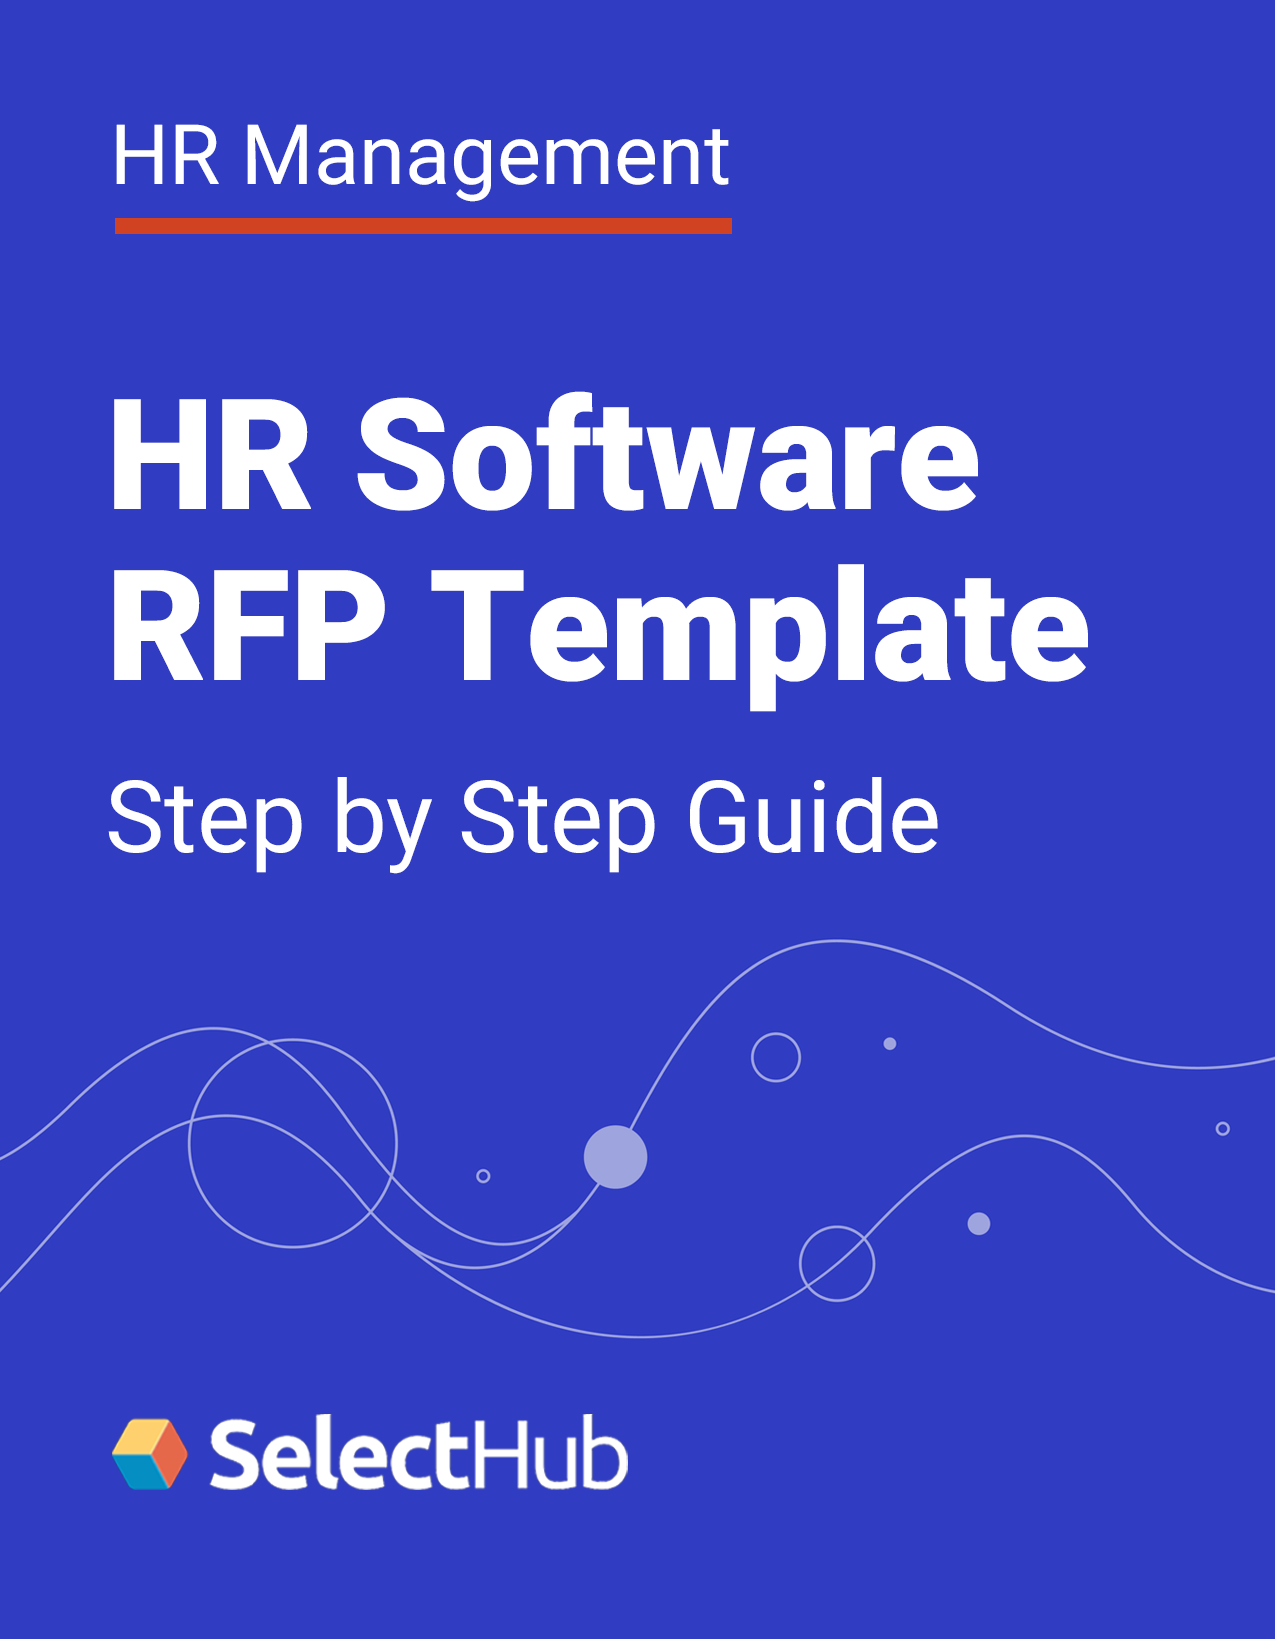 New HRIS System RFP Template and Step by Step Guide :: Software BattleCard